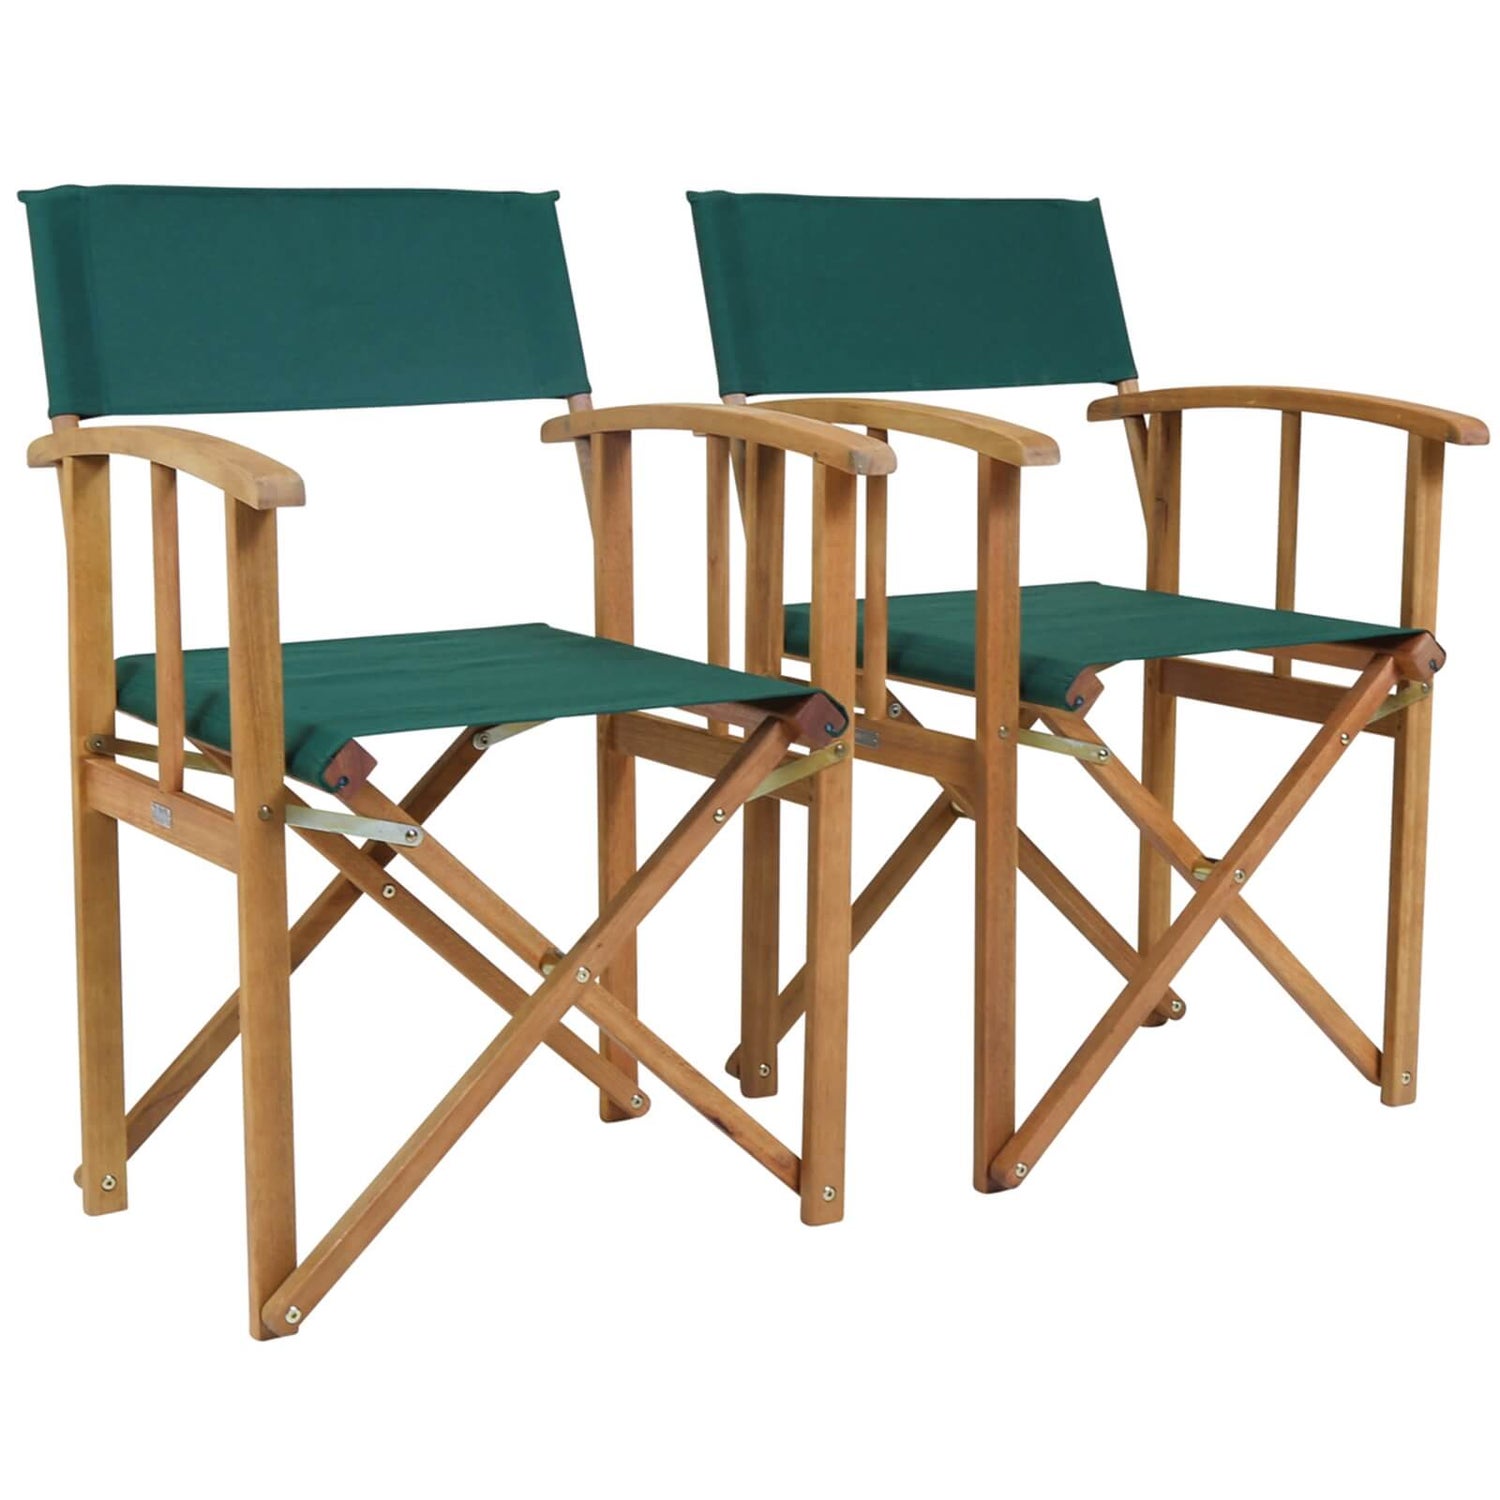 Folding Directors Chairs Green Homebase, Wooden Folding Directors Chairs Uk